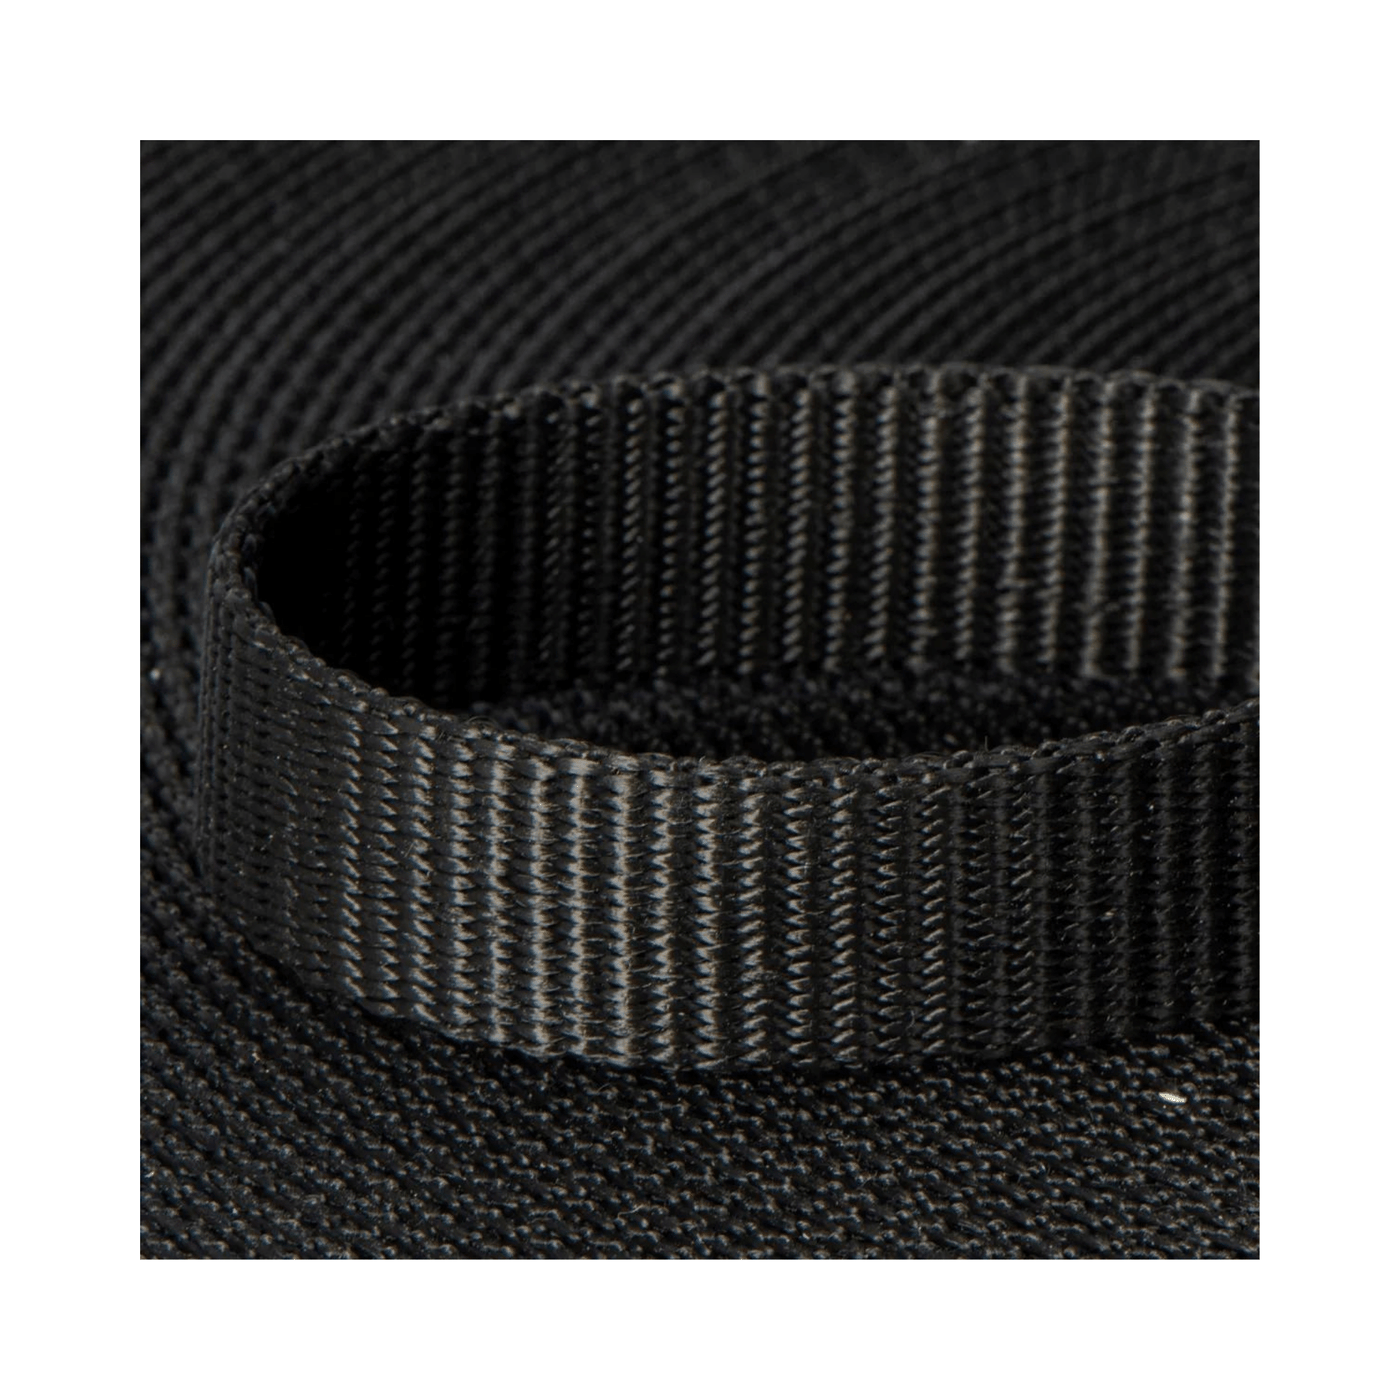 COI Webbing 25mm - Black | Backcountry Gear & Accessories | Further Faster Christchurch NZ